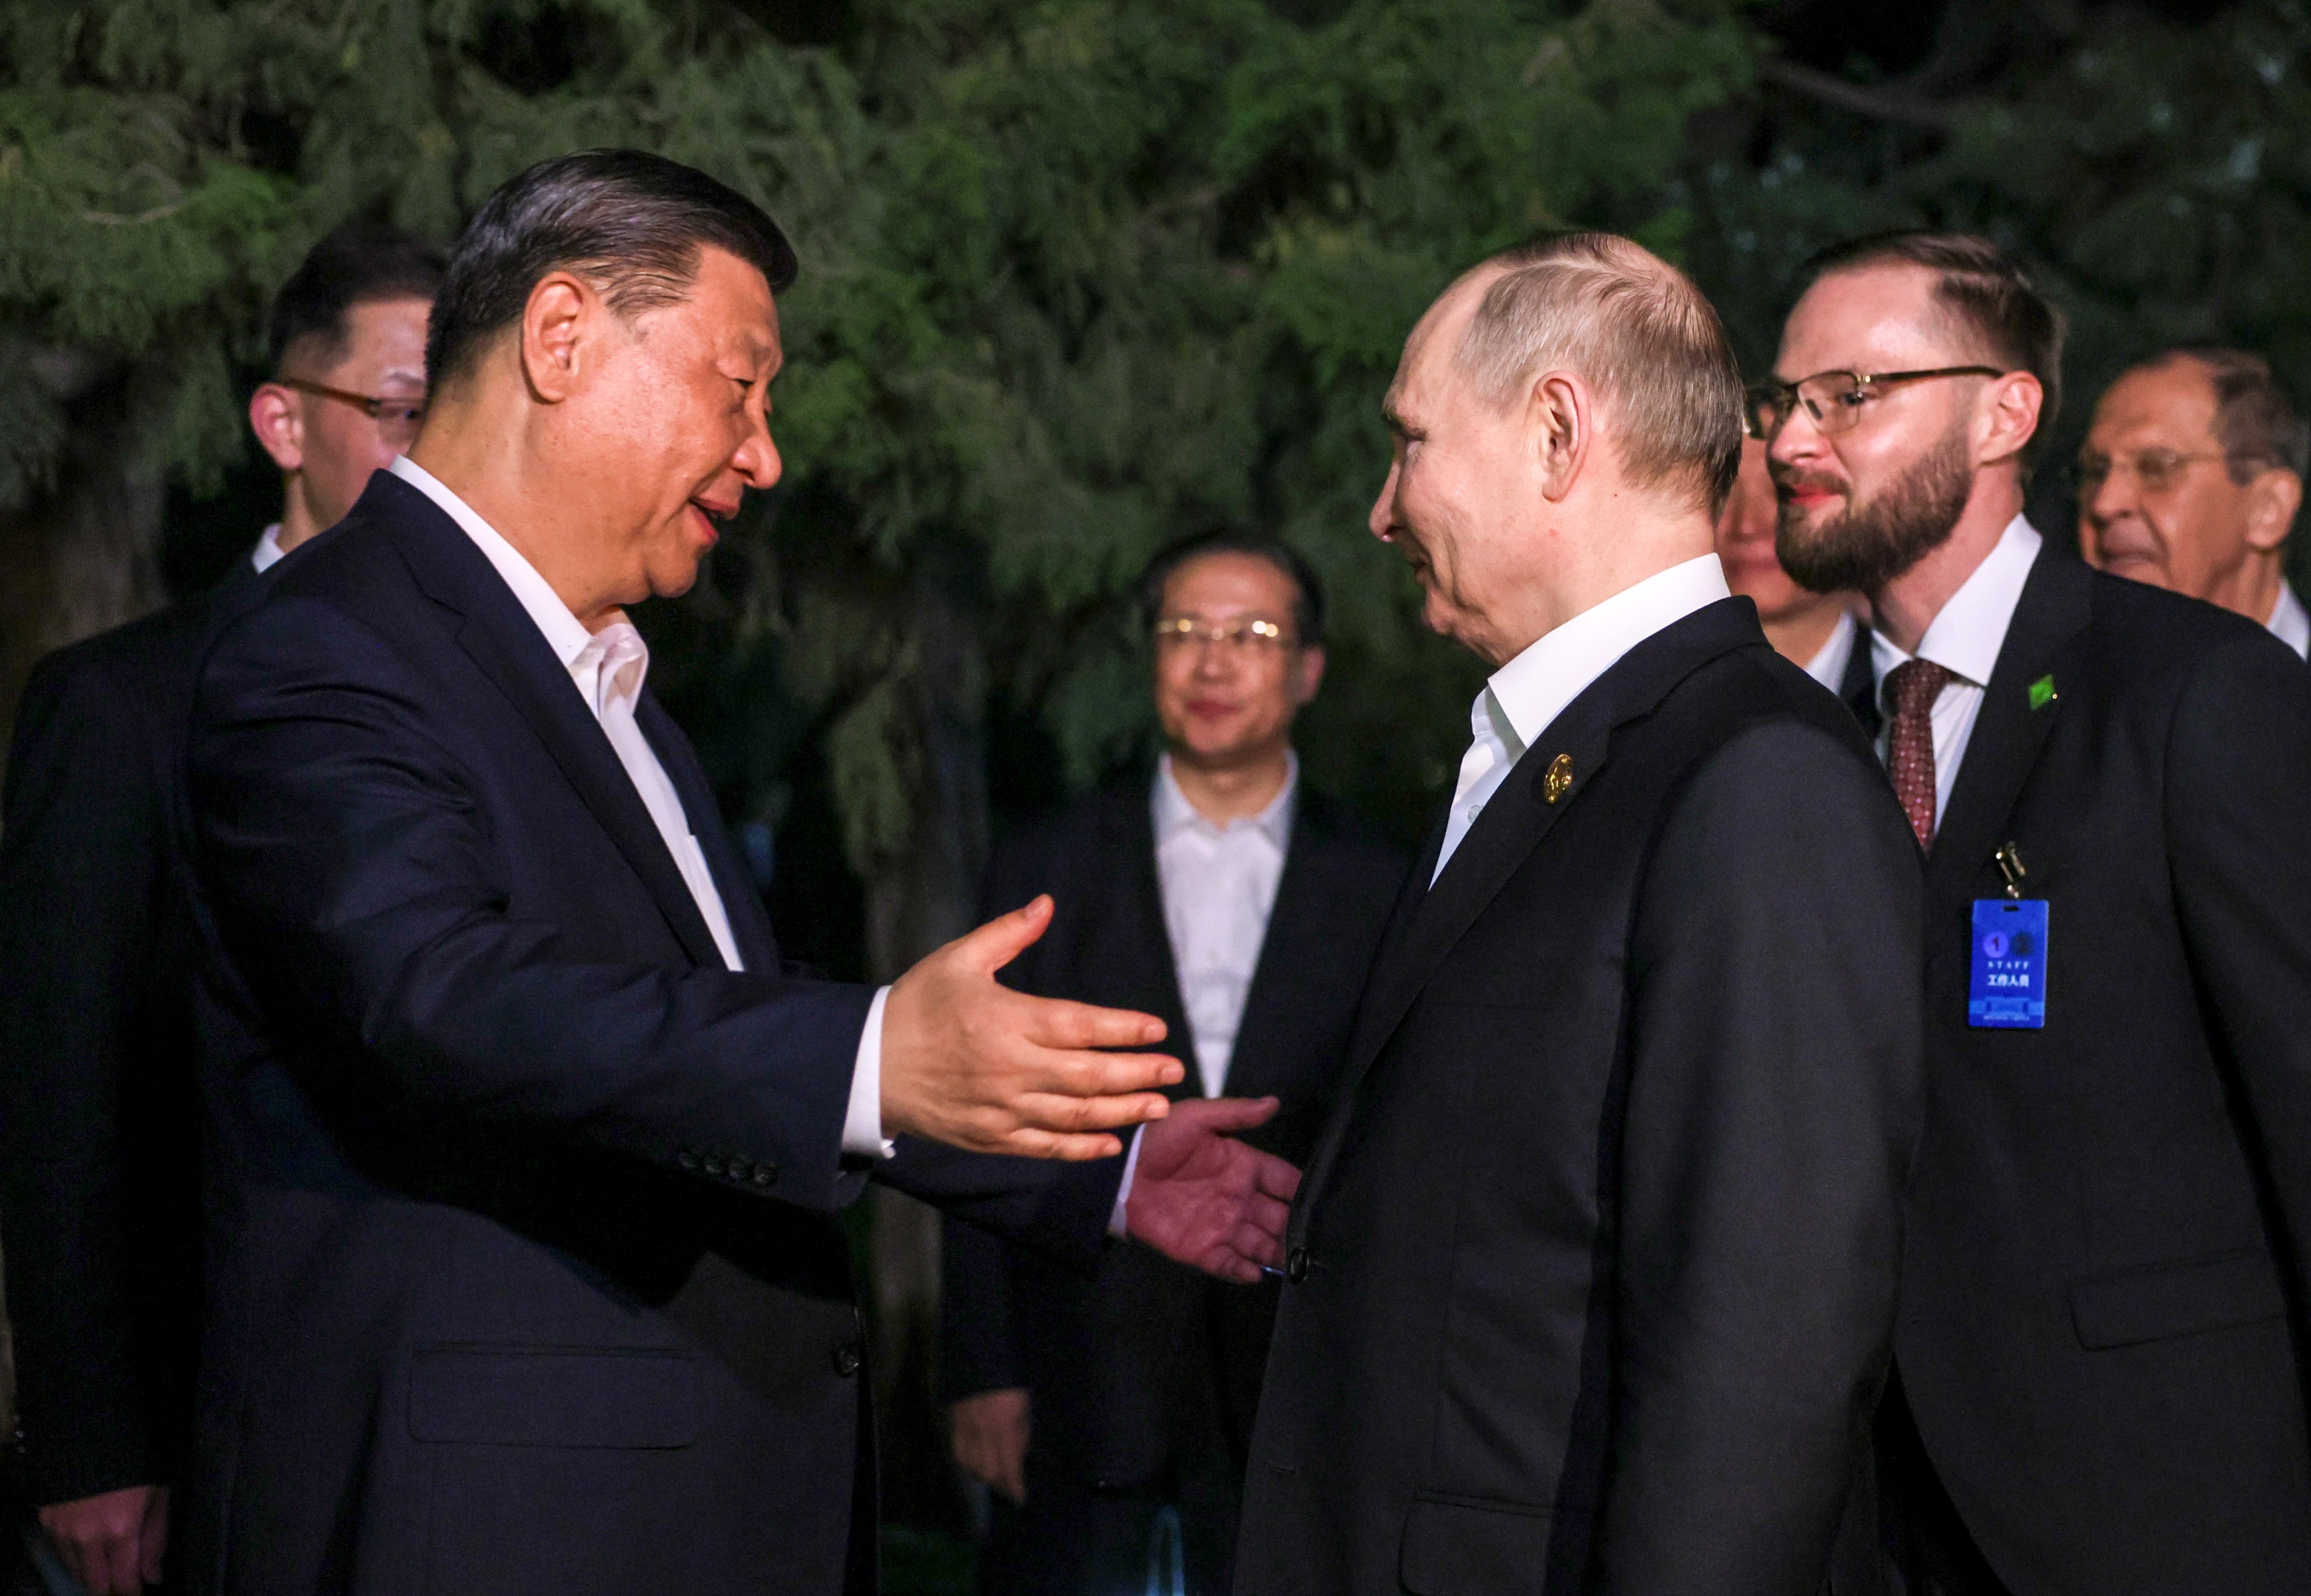 Russian President Vladimir Putin, who visited China on May 16-17, and Chinese President Xi Jinping vowed to build even closer ties in energy and finance sectors and extract more benefits from their partnership in other areas. Photo: EPA-EFE